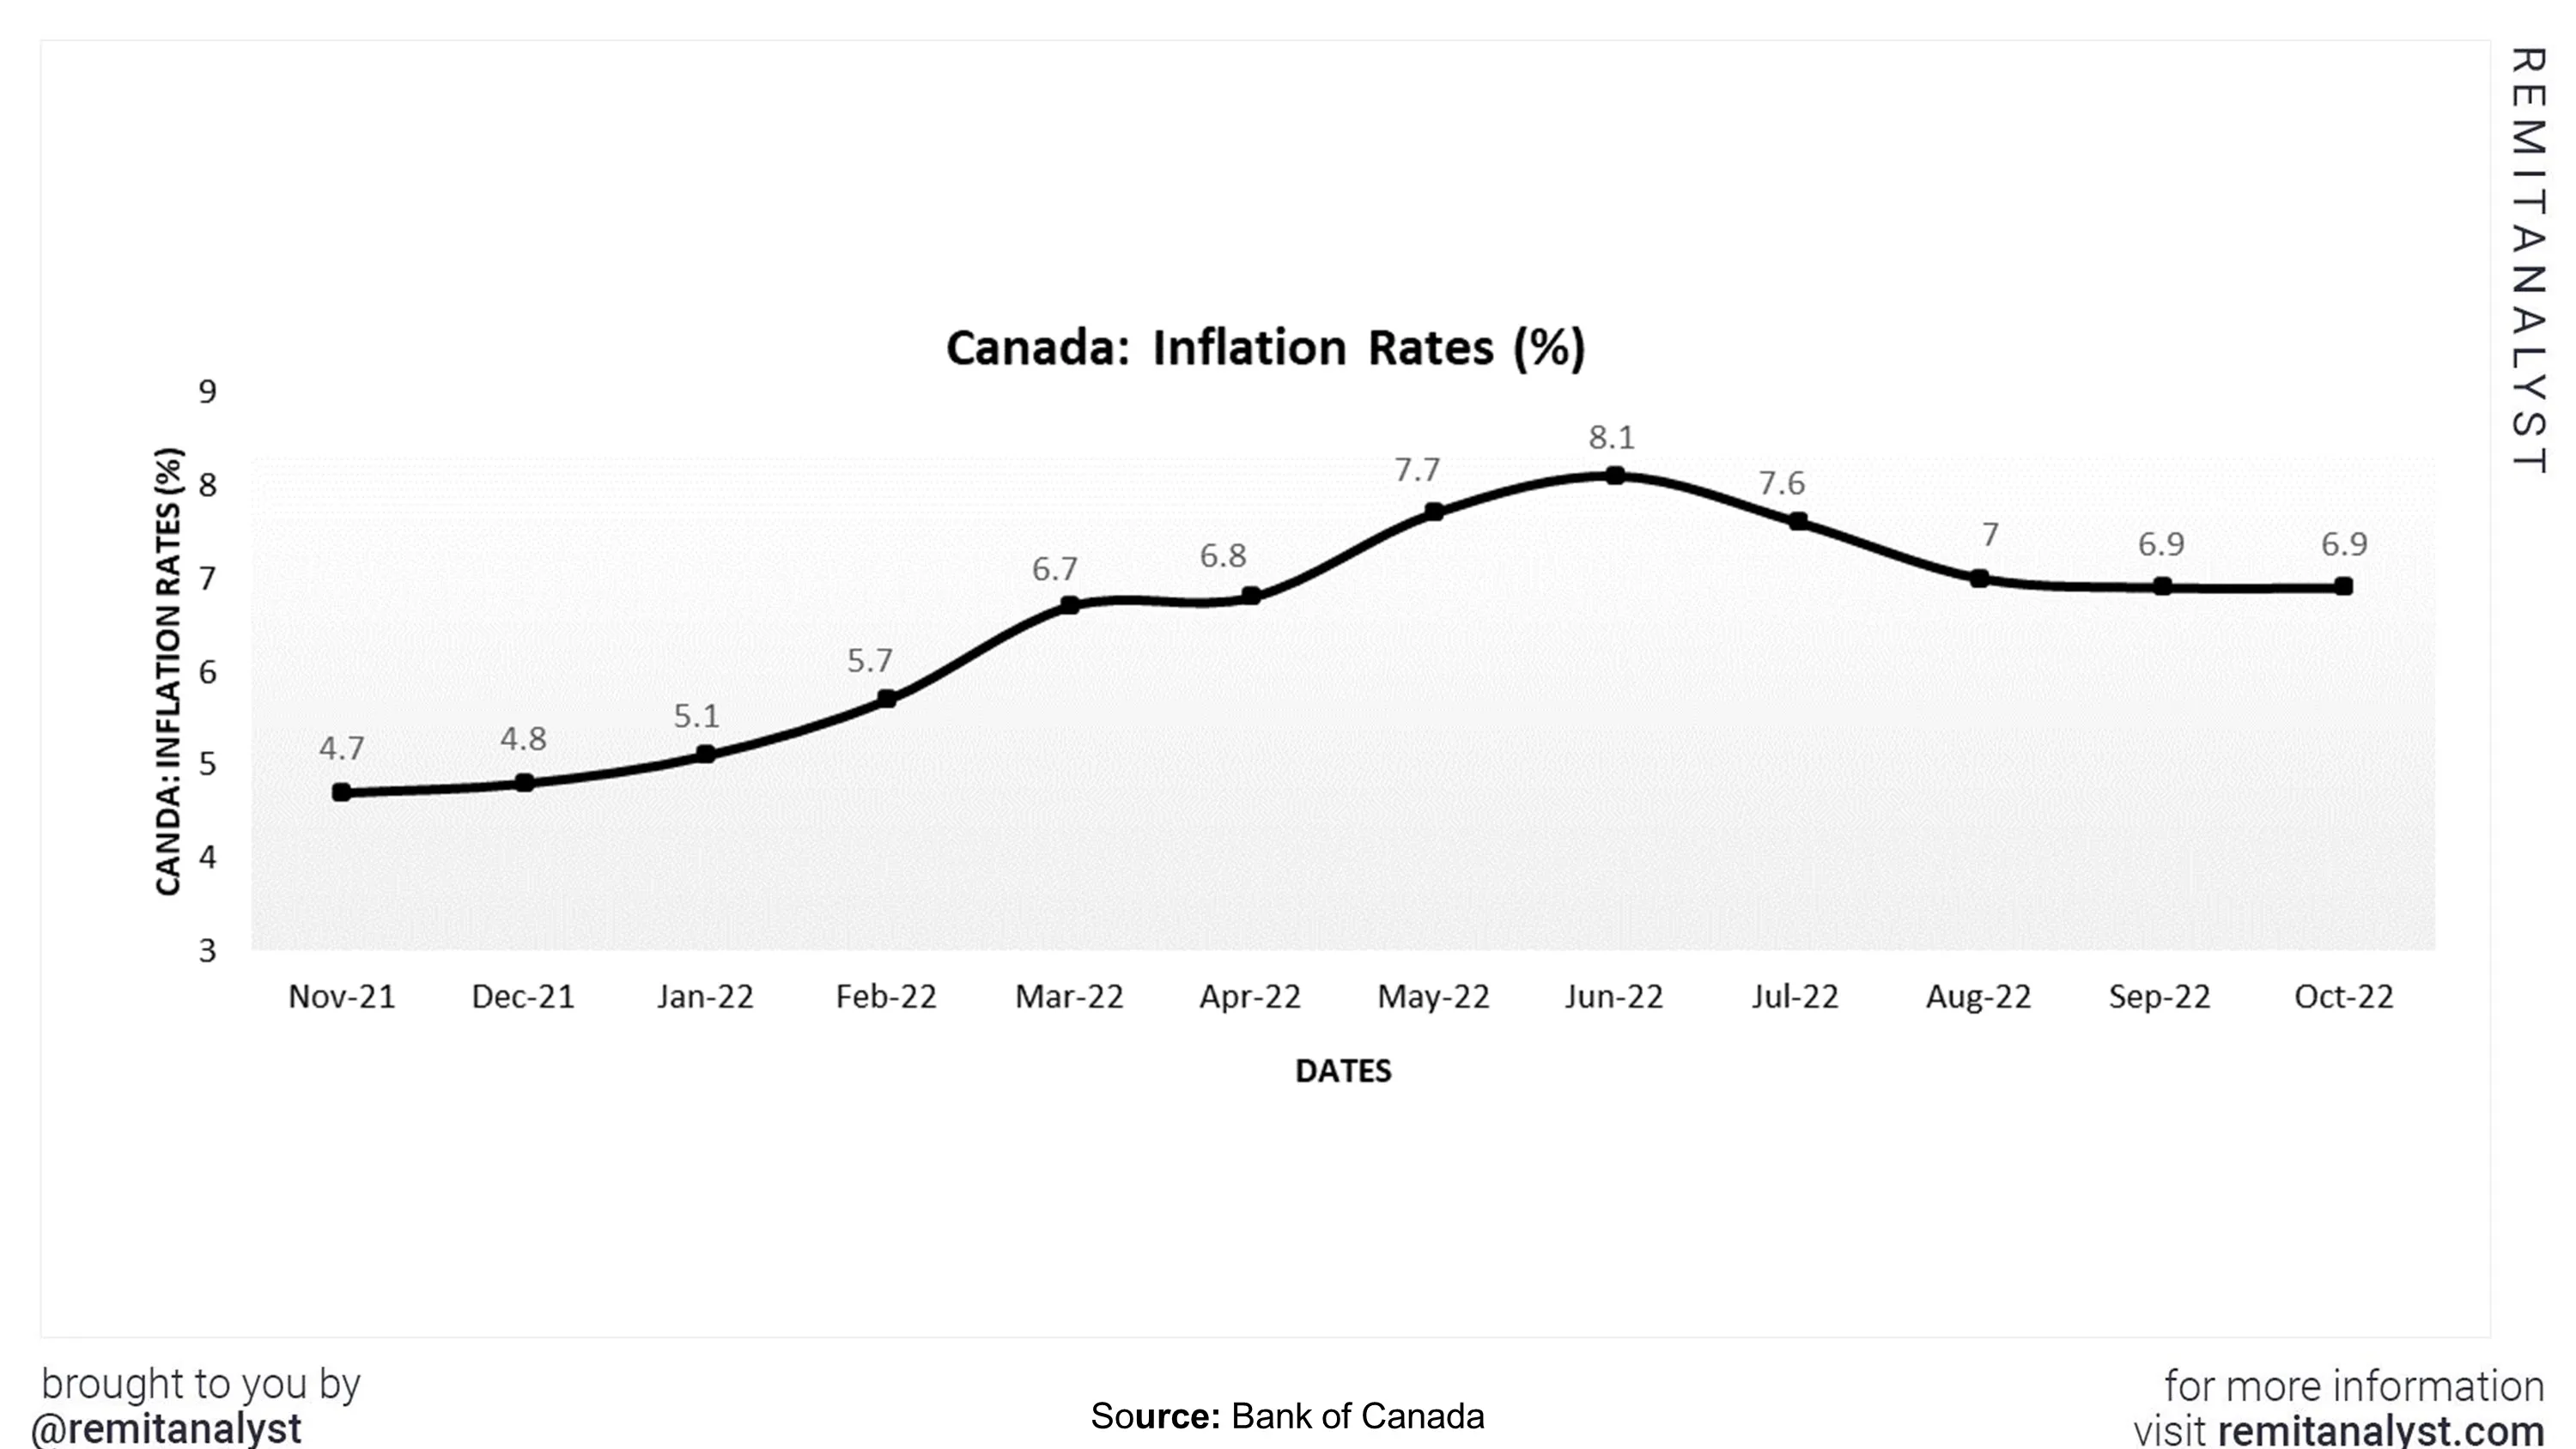 inflation-rates-canada-from-nov-2021-to-oct-2022